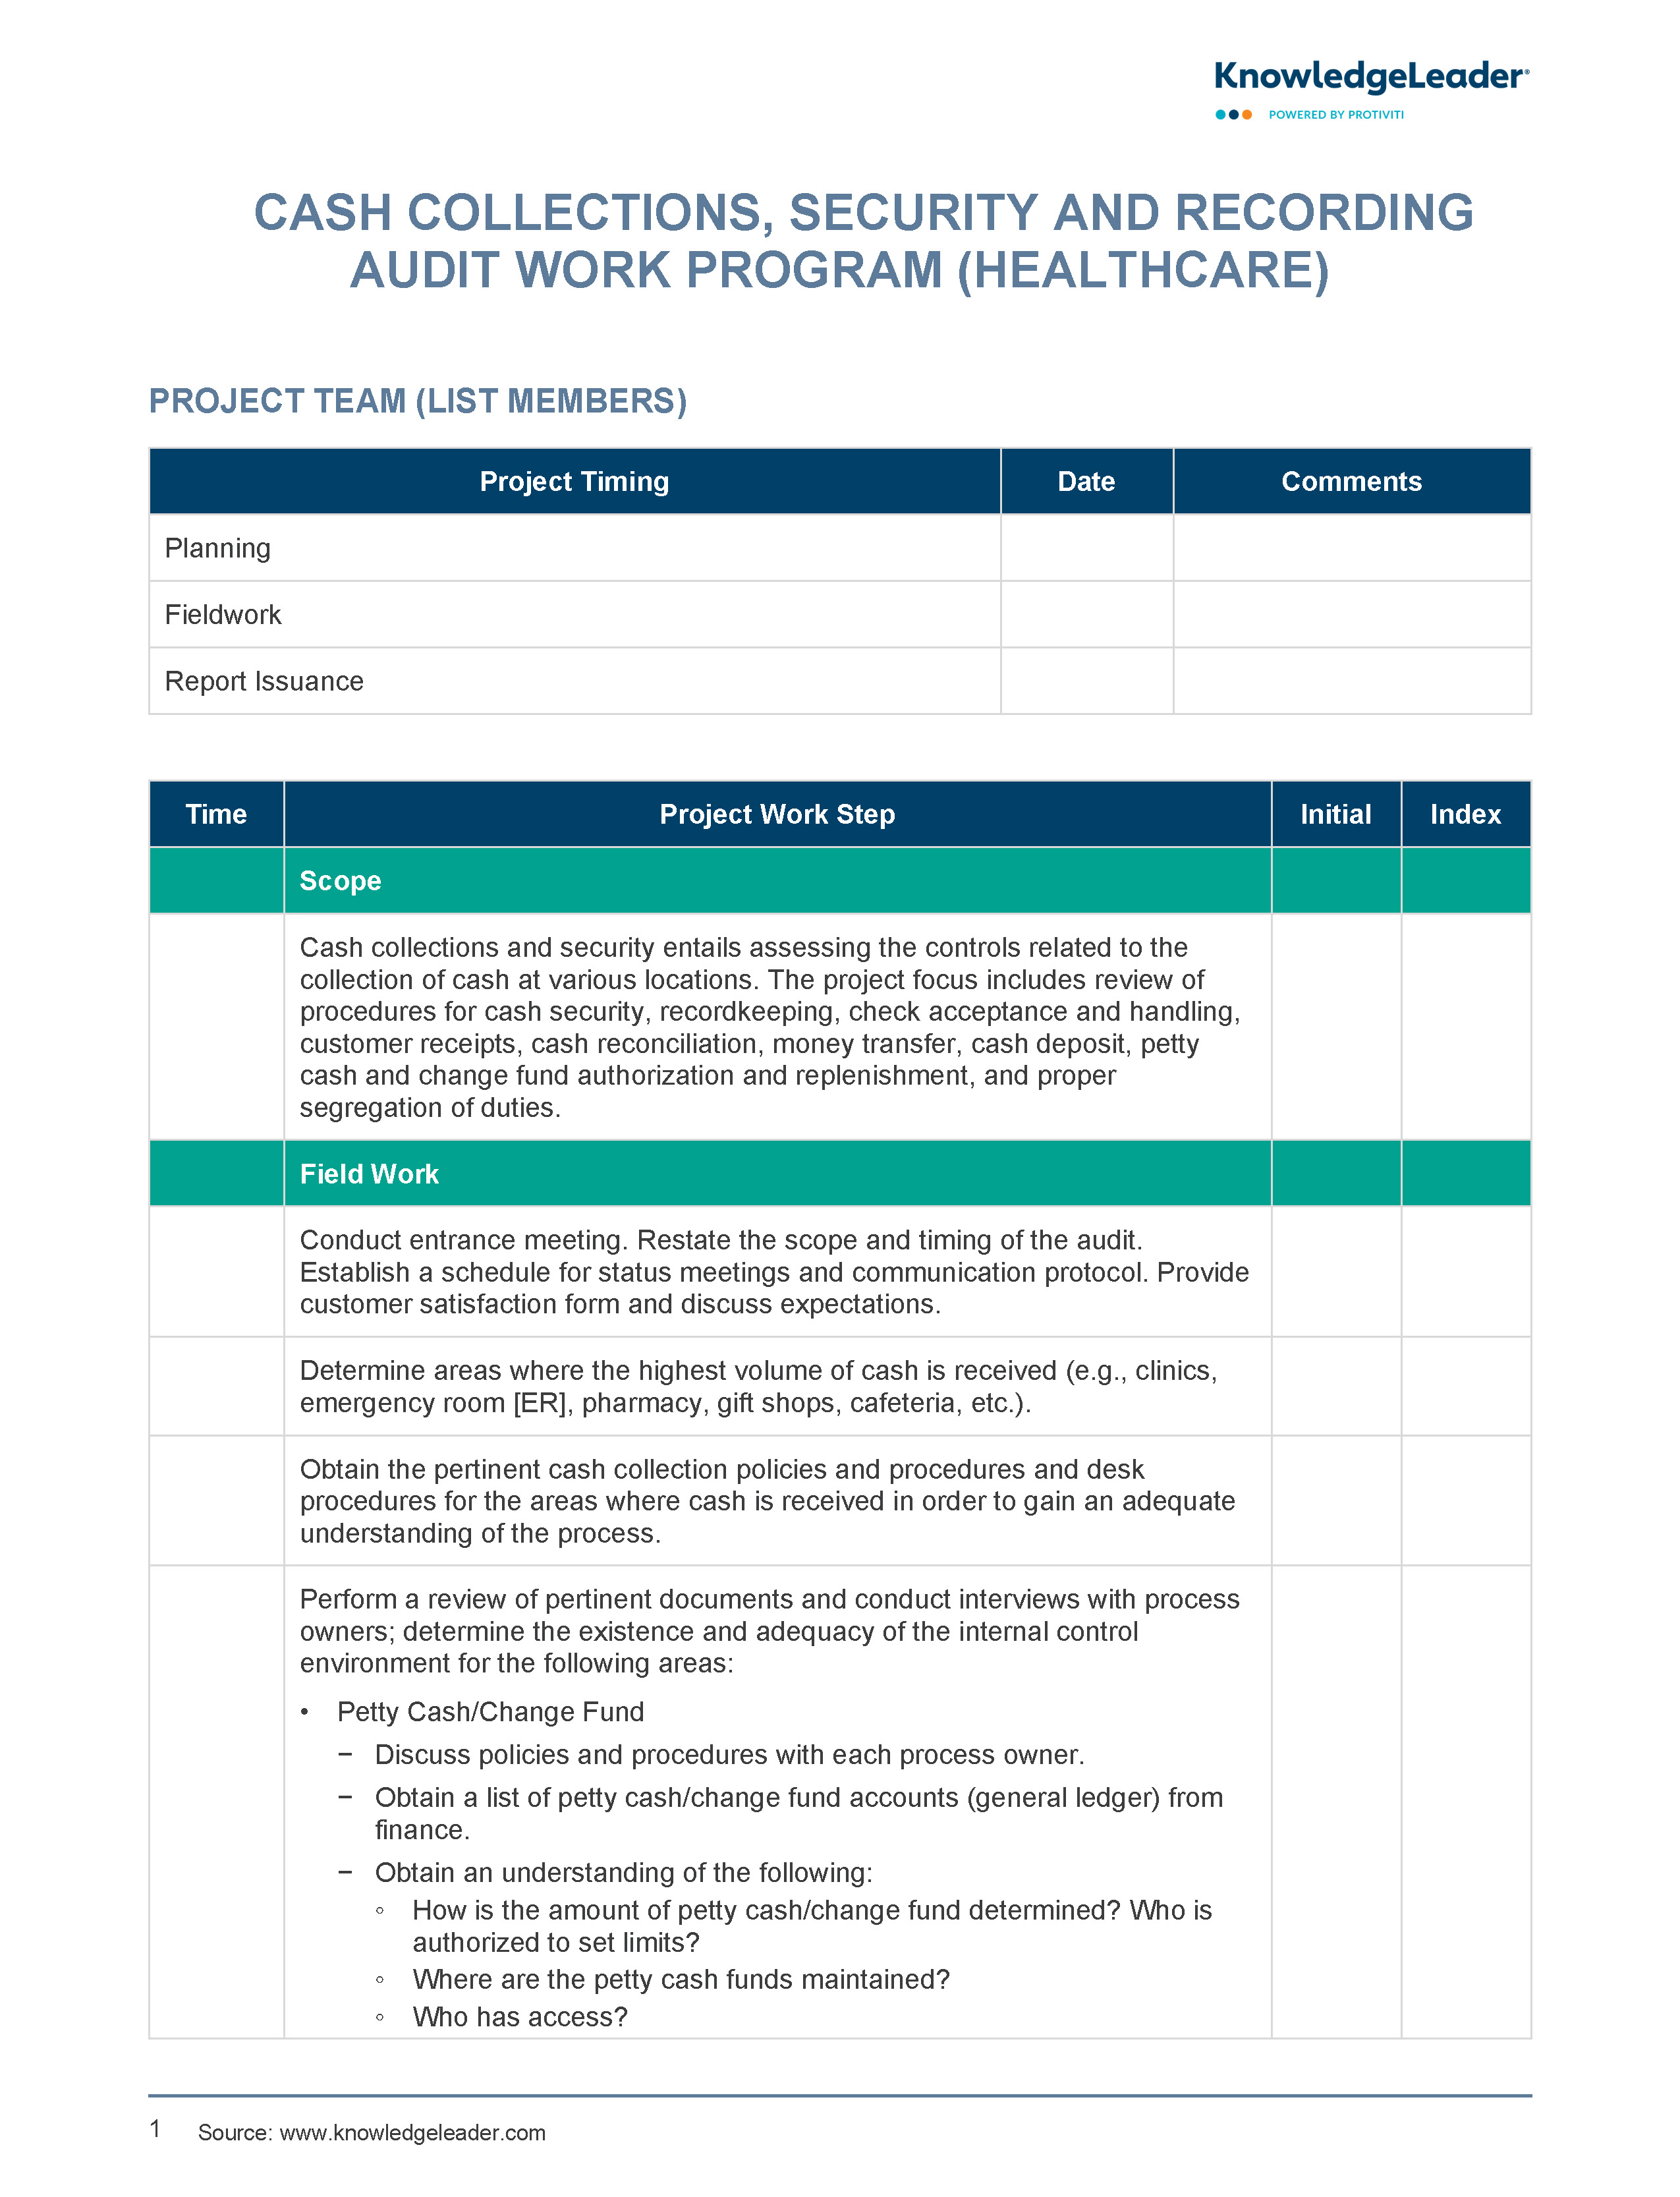 screenshot of the first page of Cash Collections, Security and Recording Review Audit Work Program (Healthcare)